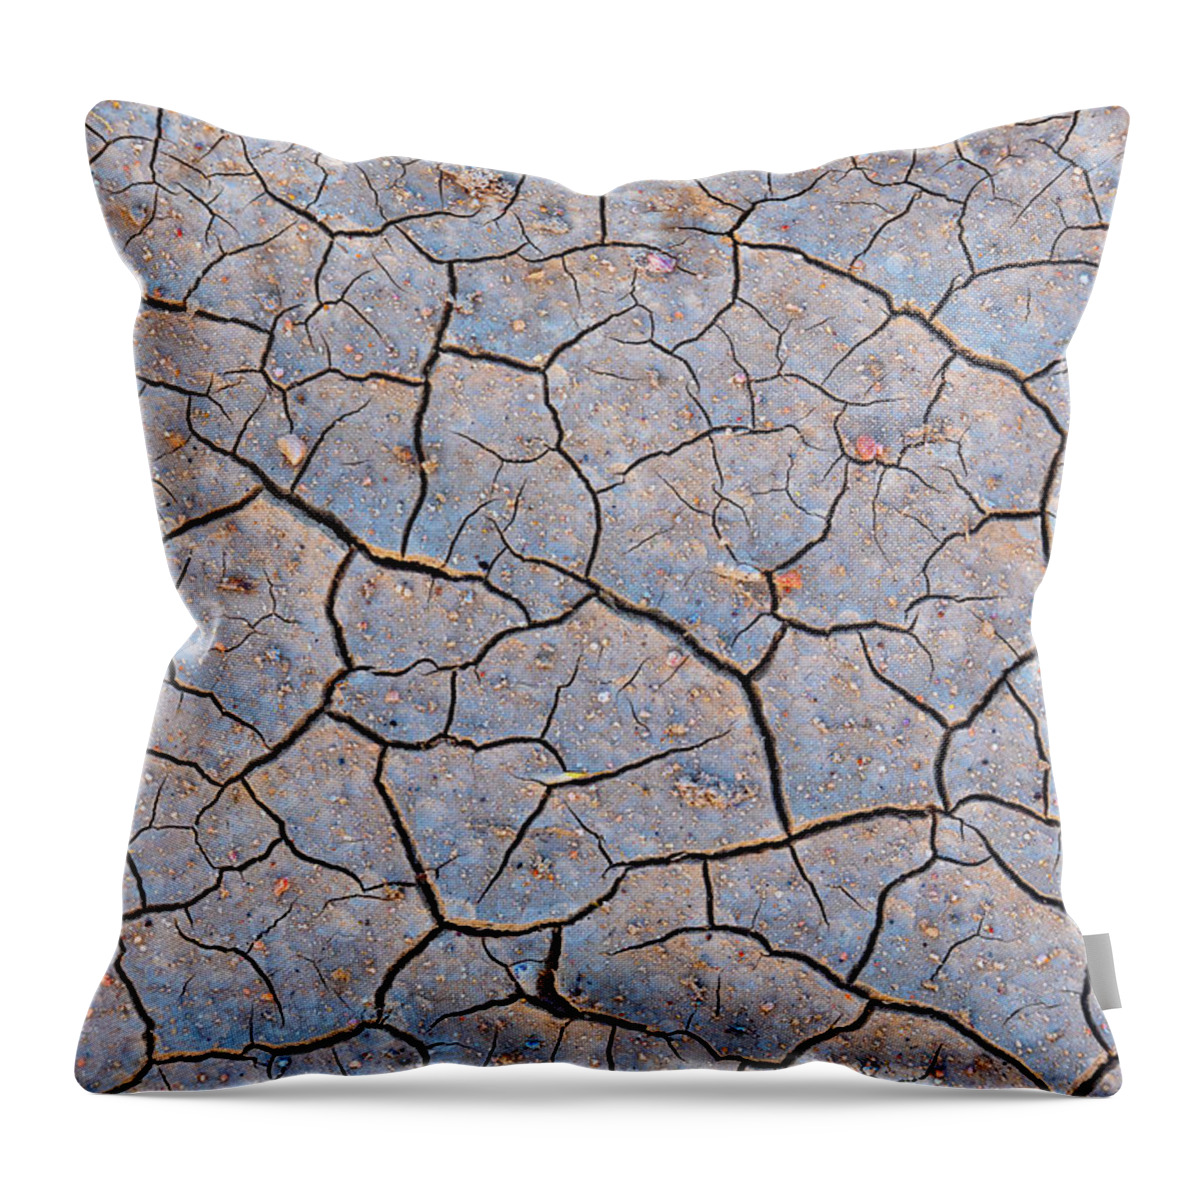 Mud Throw Pillow featuring the photograph Mud Puzzle by Darren White